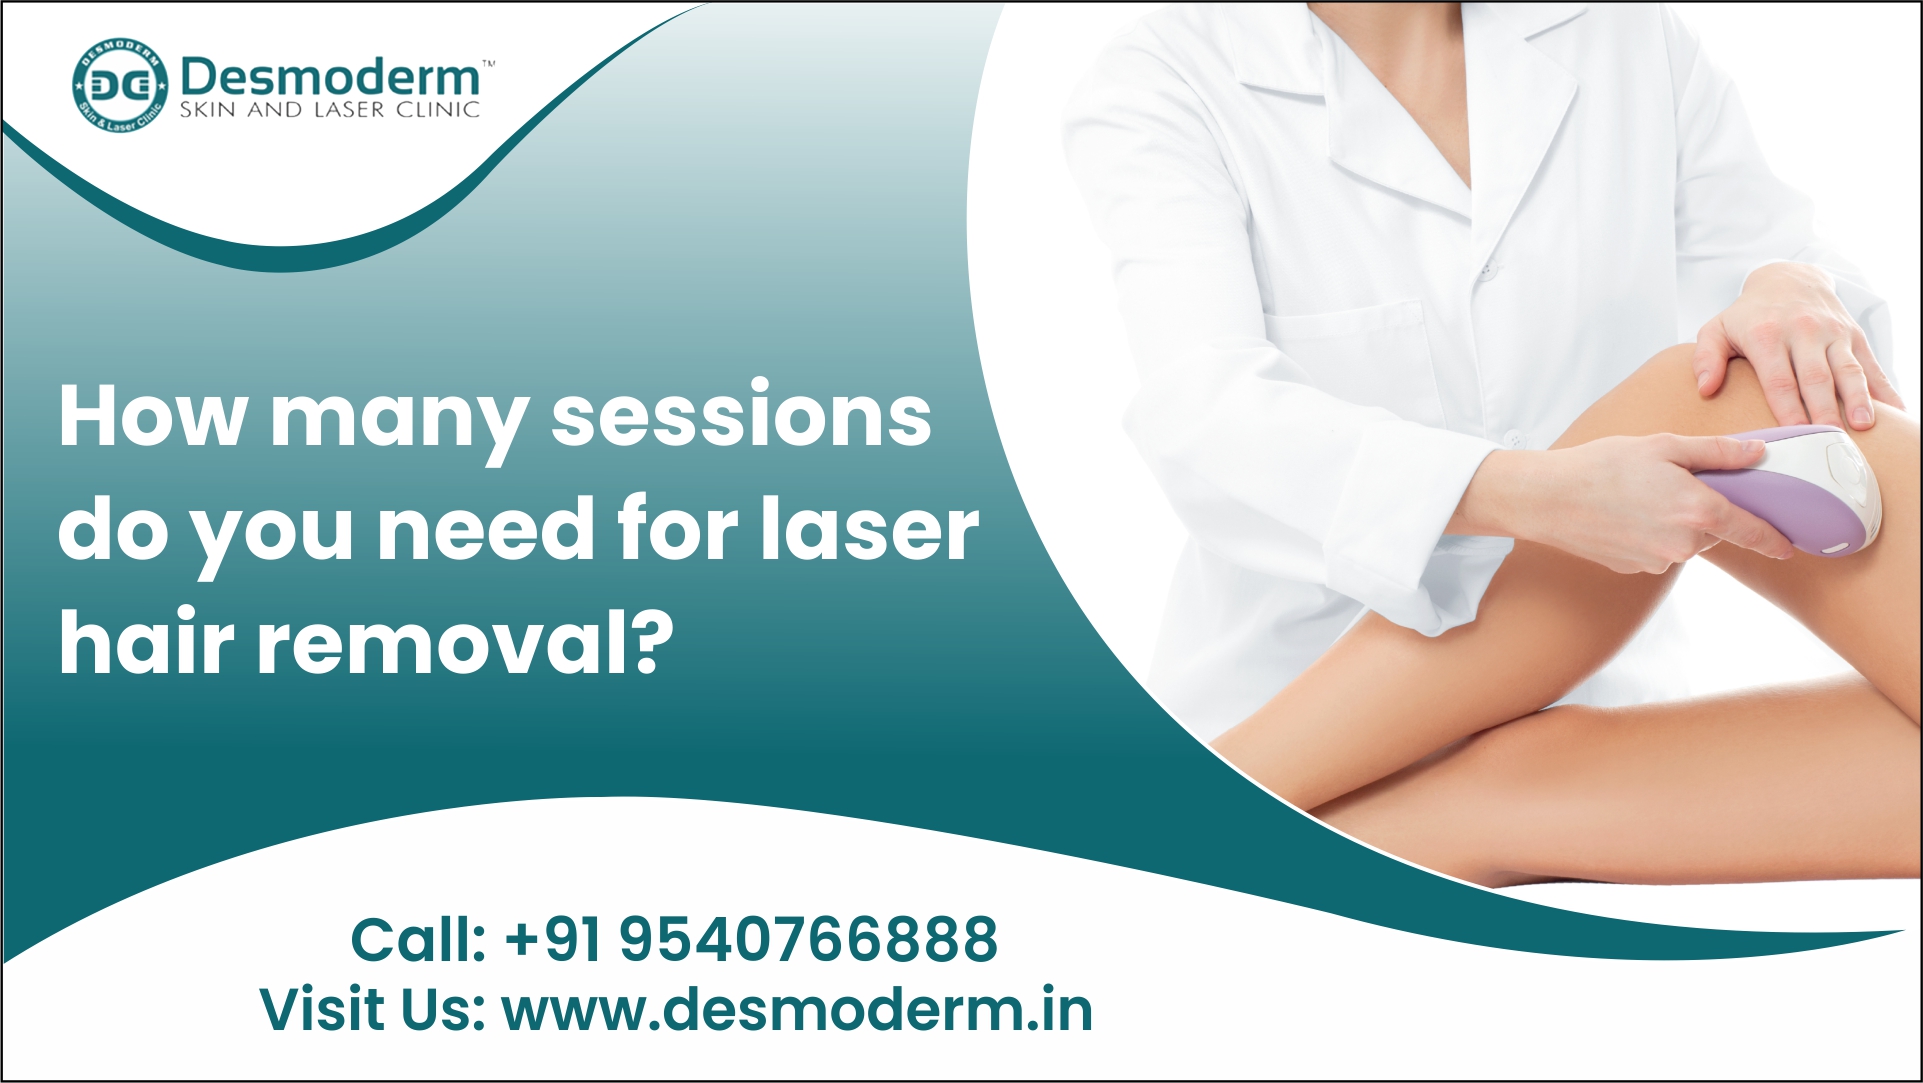 How Many Sessions Do You Need for Laser Hair Removal? | Desmoderm